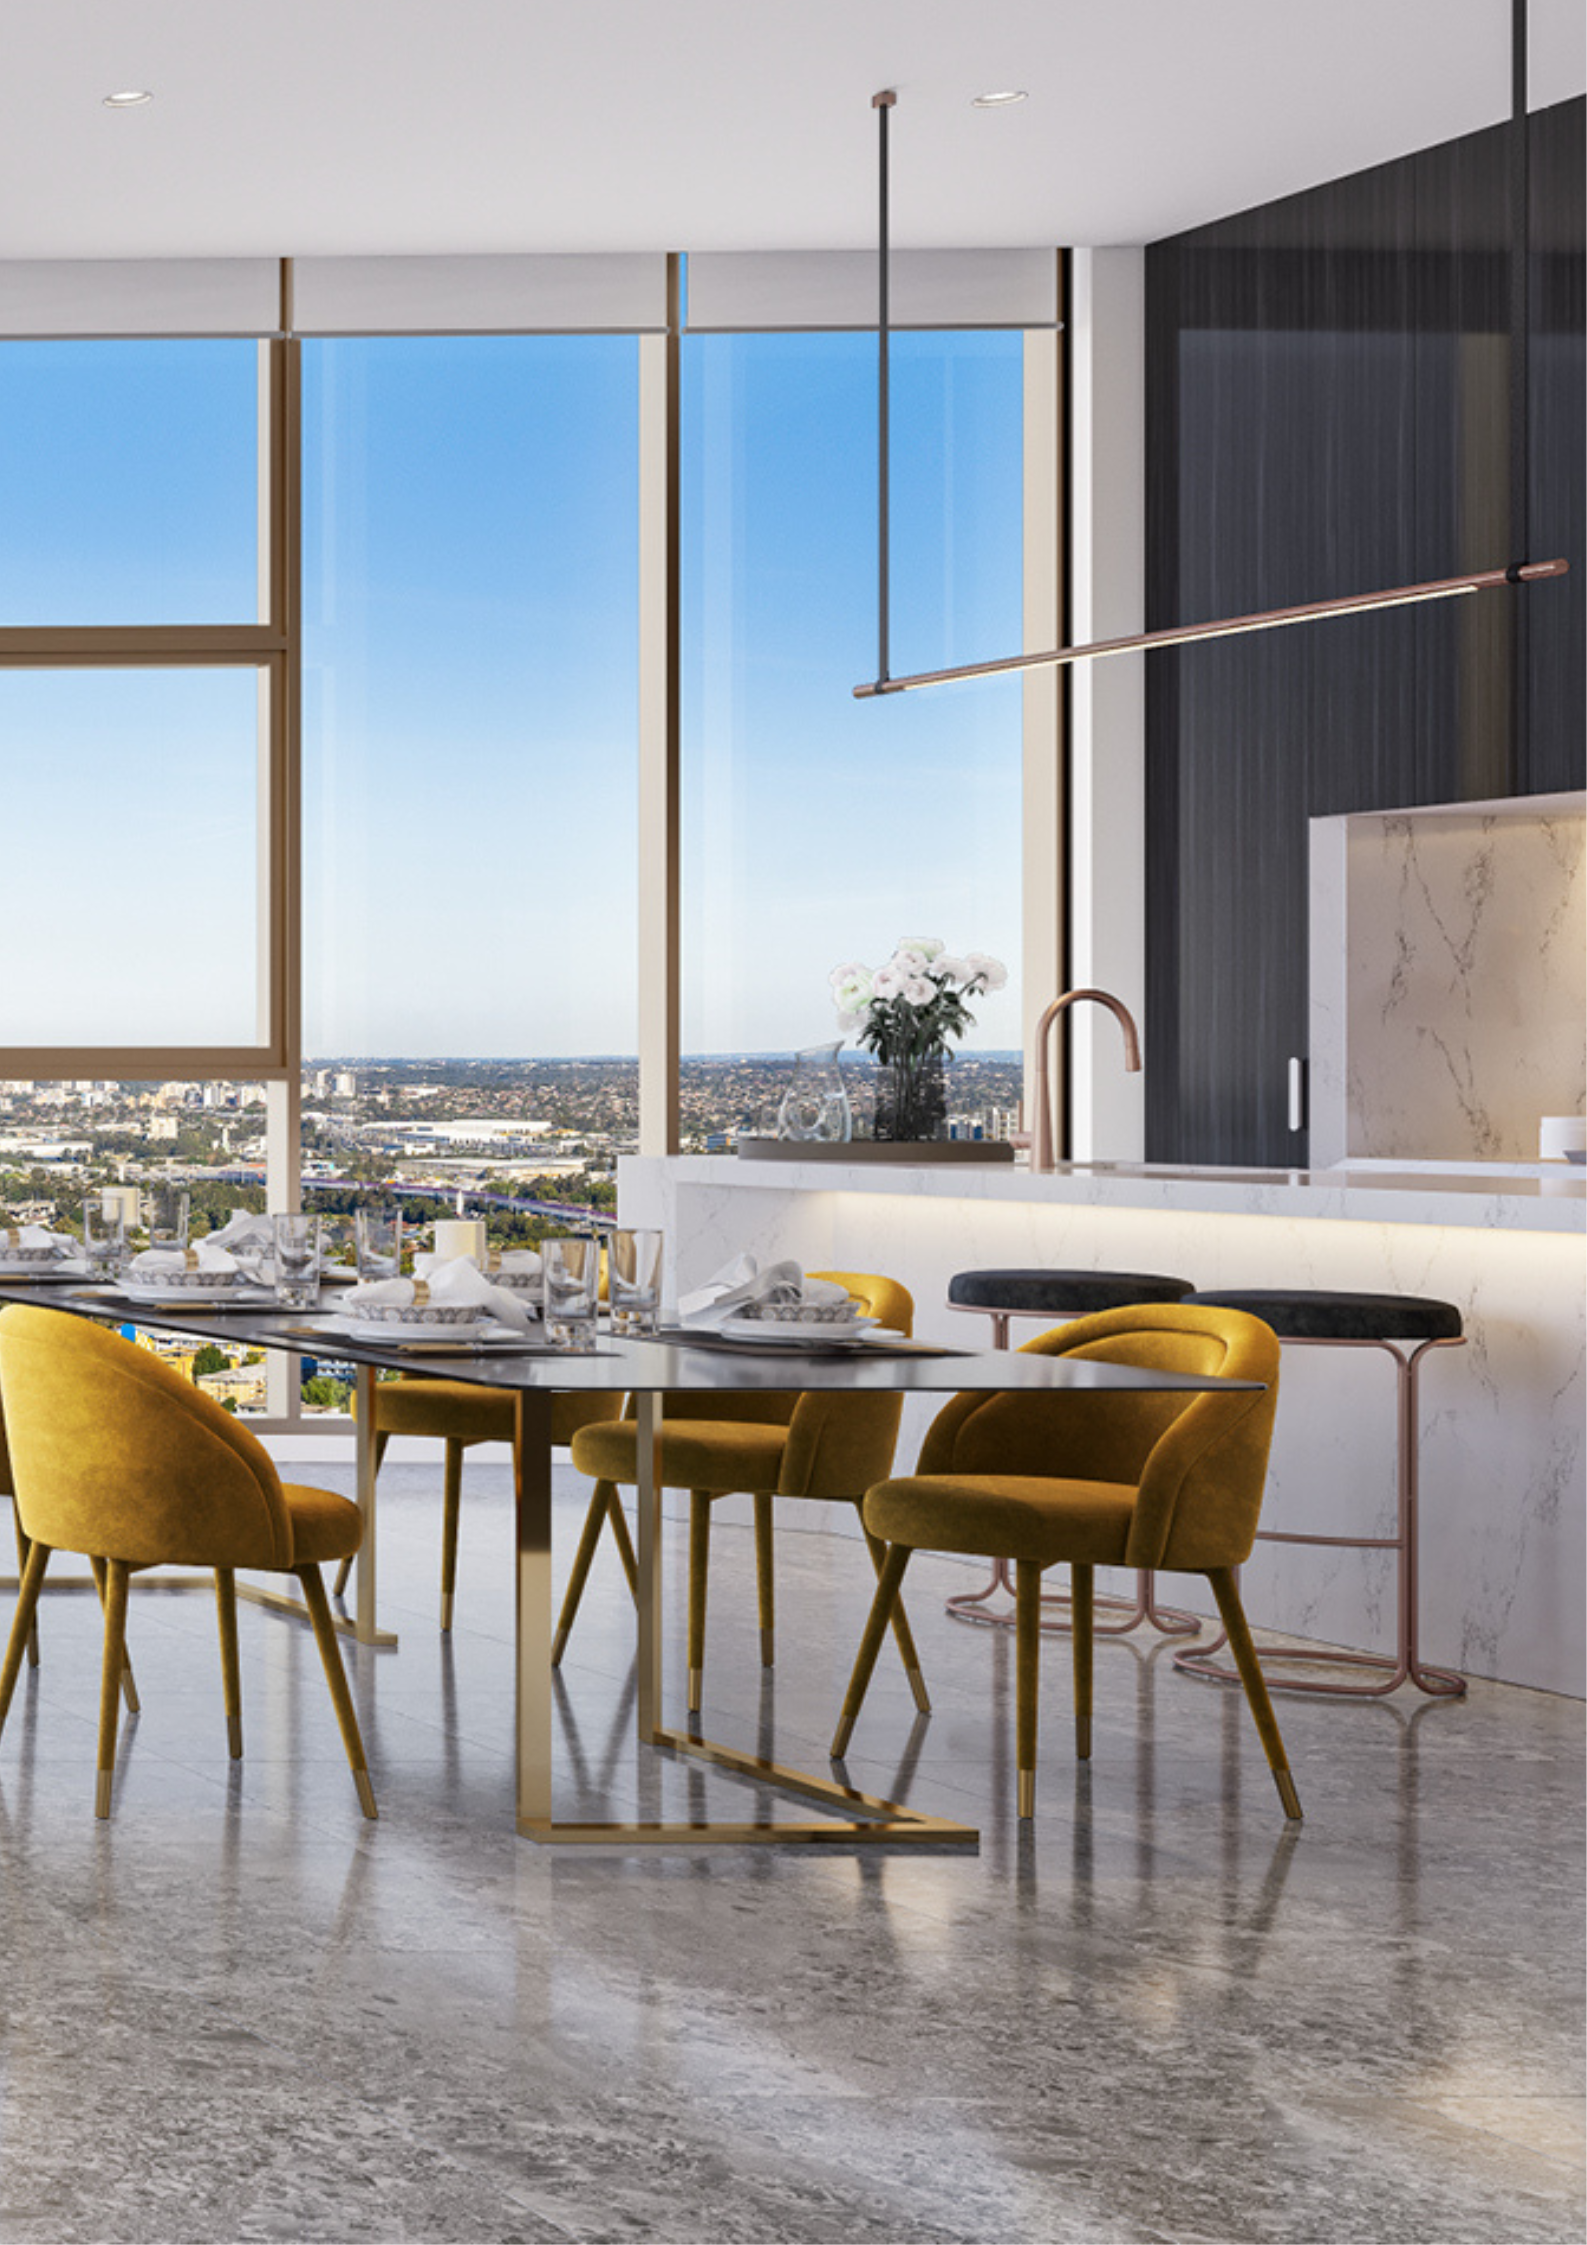 Experience unparalleled luxury living. 180 George, a landmark luxury apartment building offering stunning views in the heart of Parramatta, Australia.